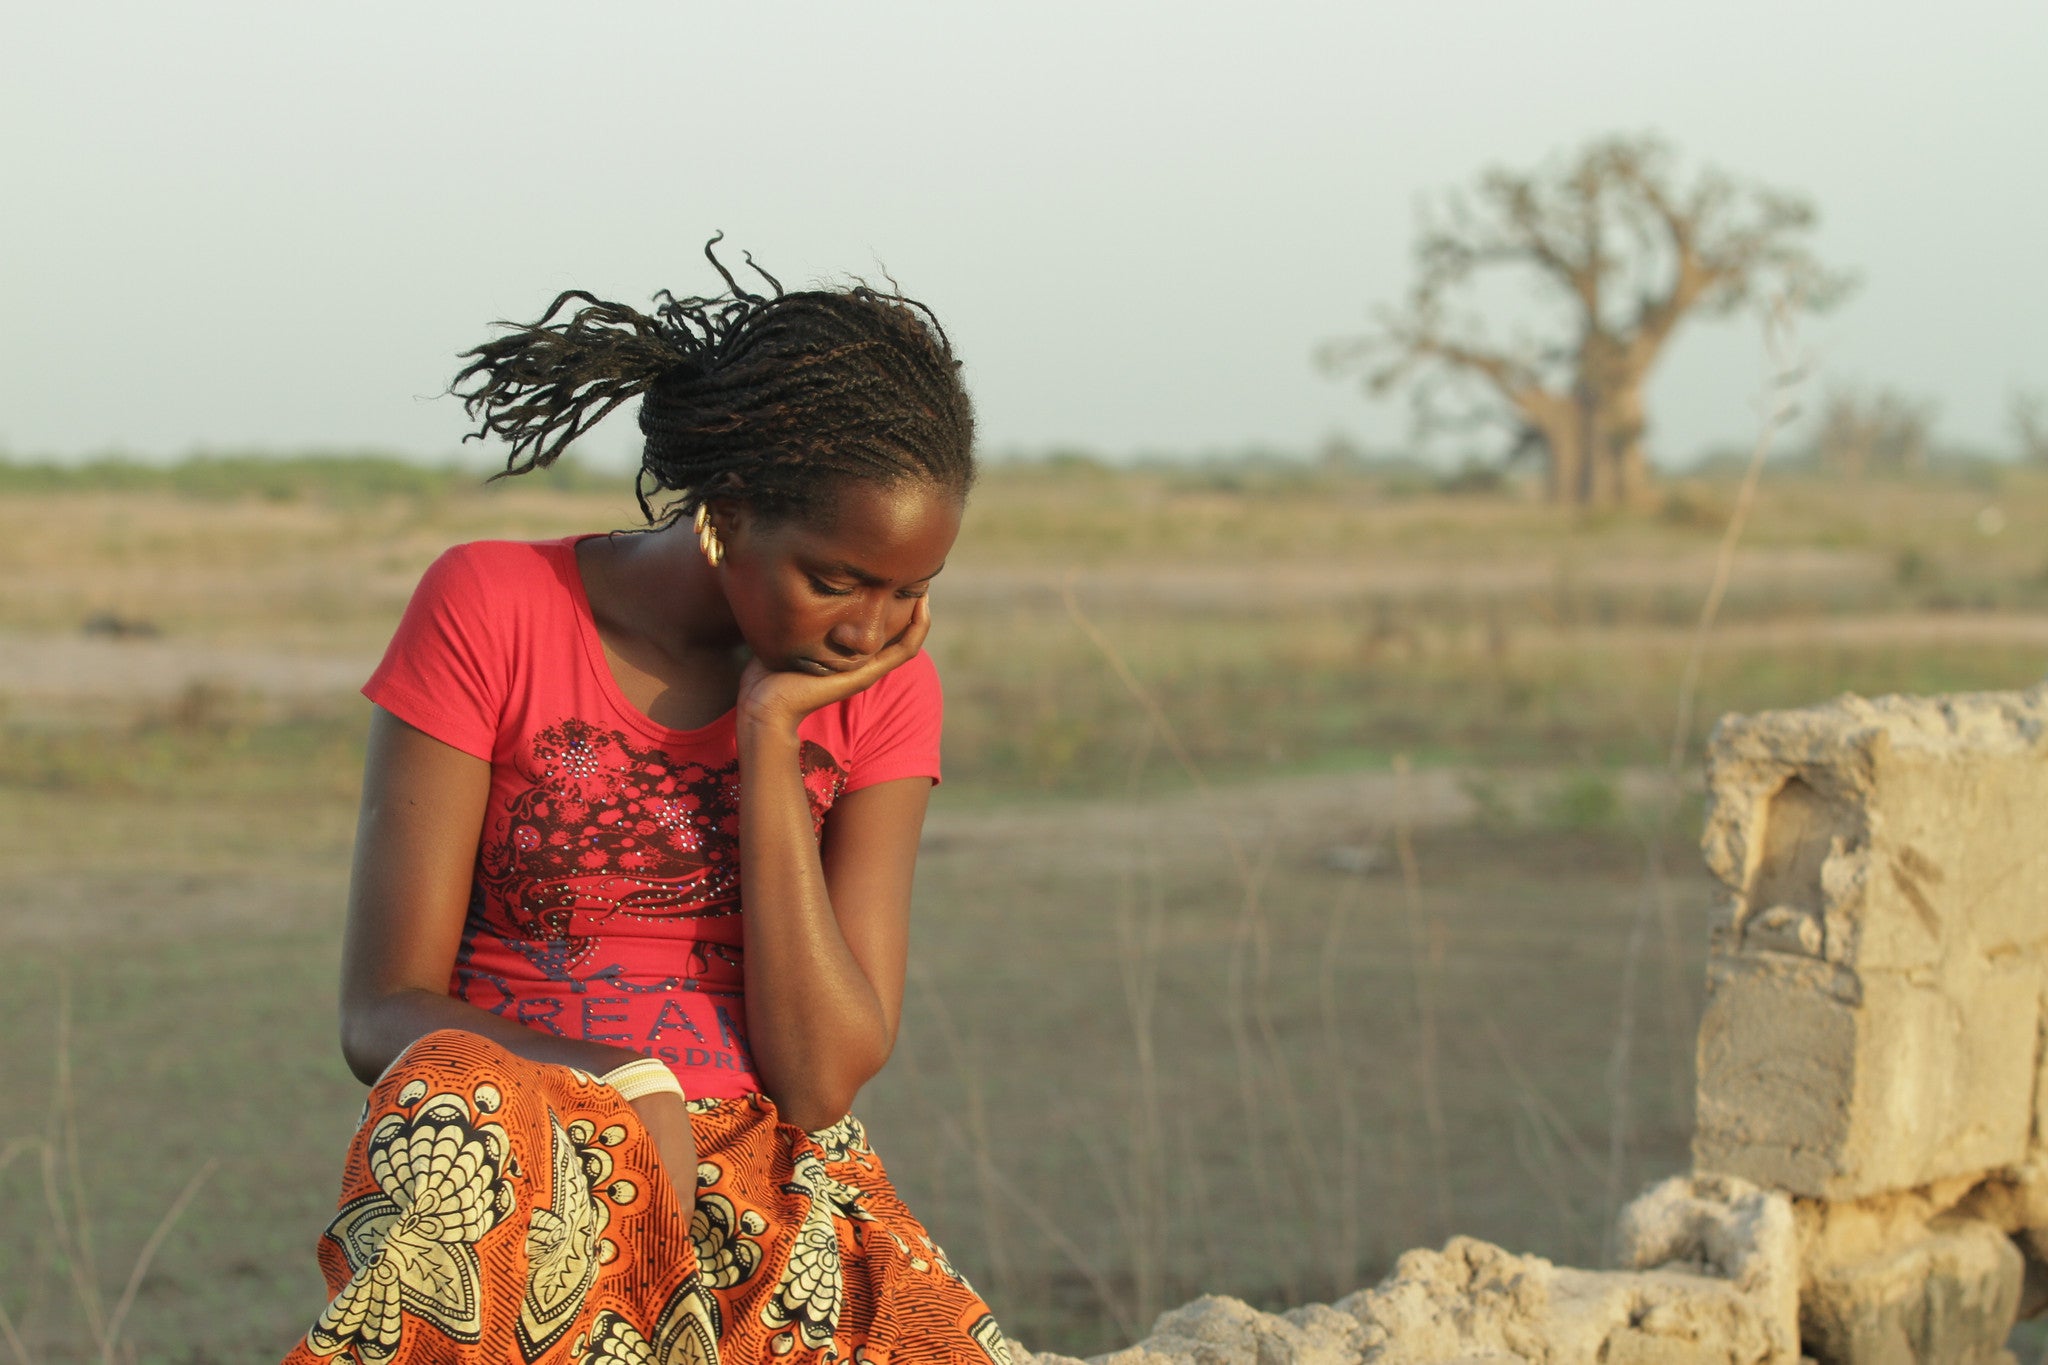 Scene from documentary "Tall as the Baobab Tree"